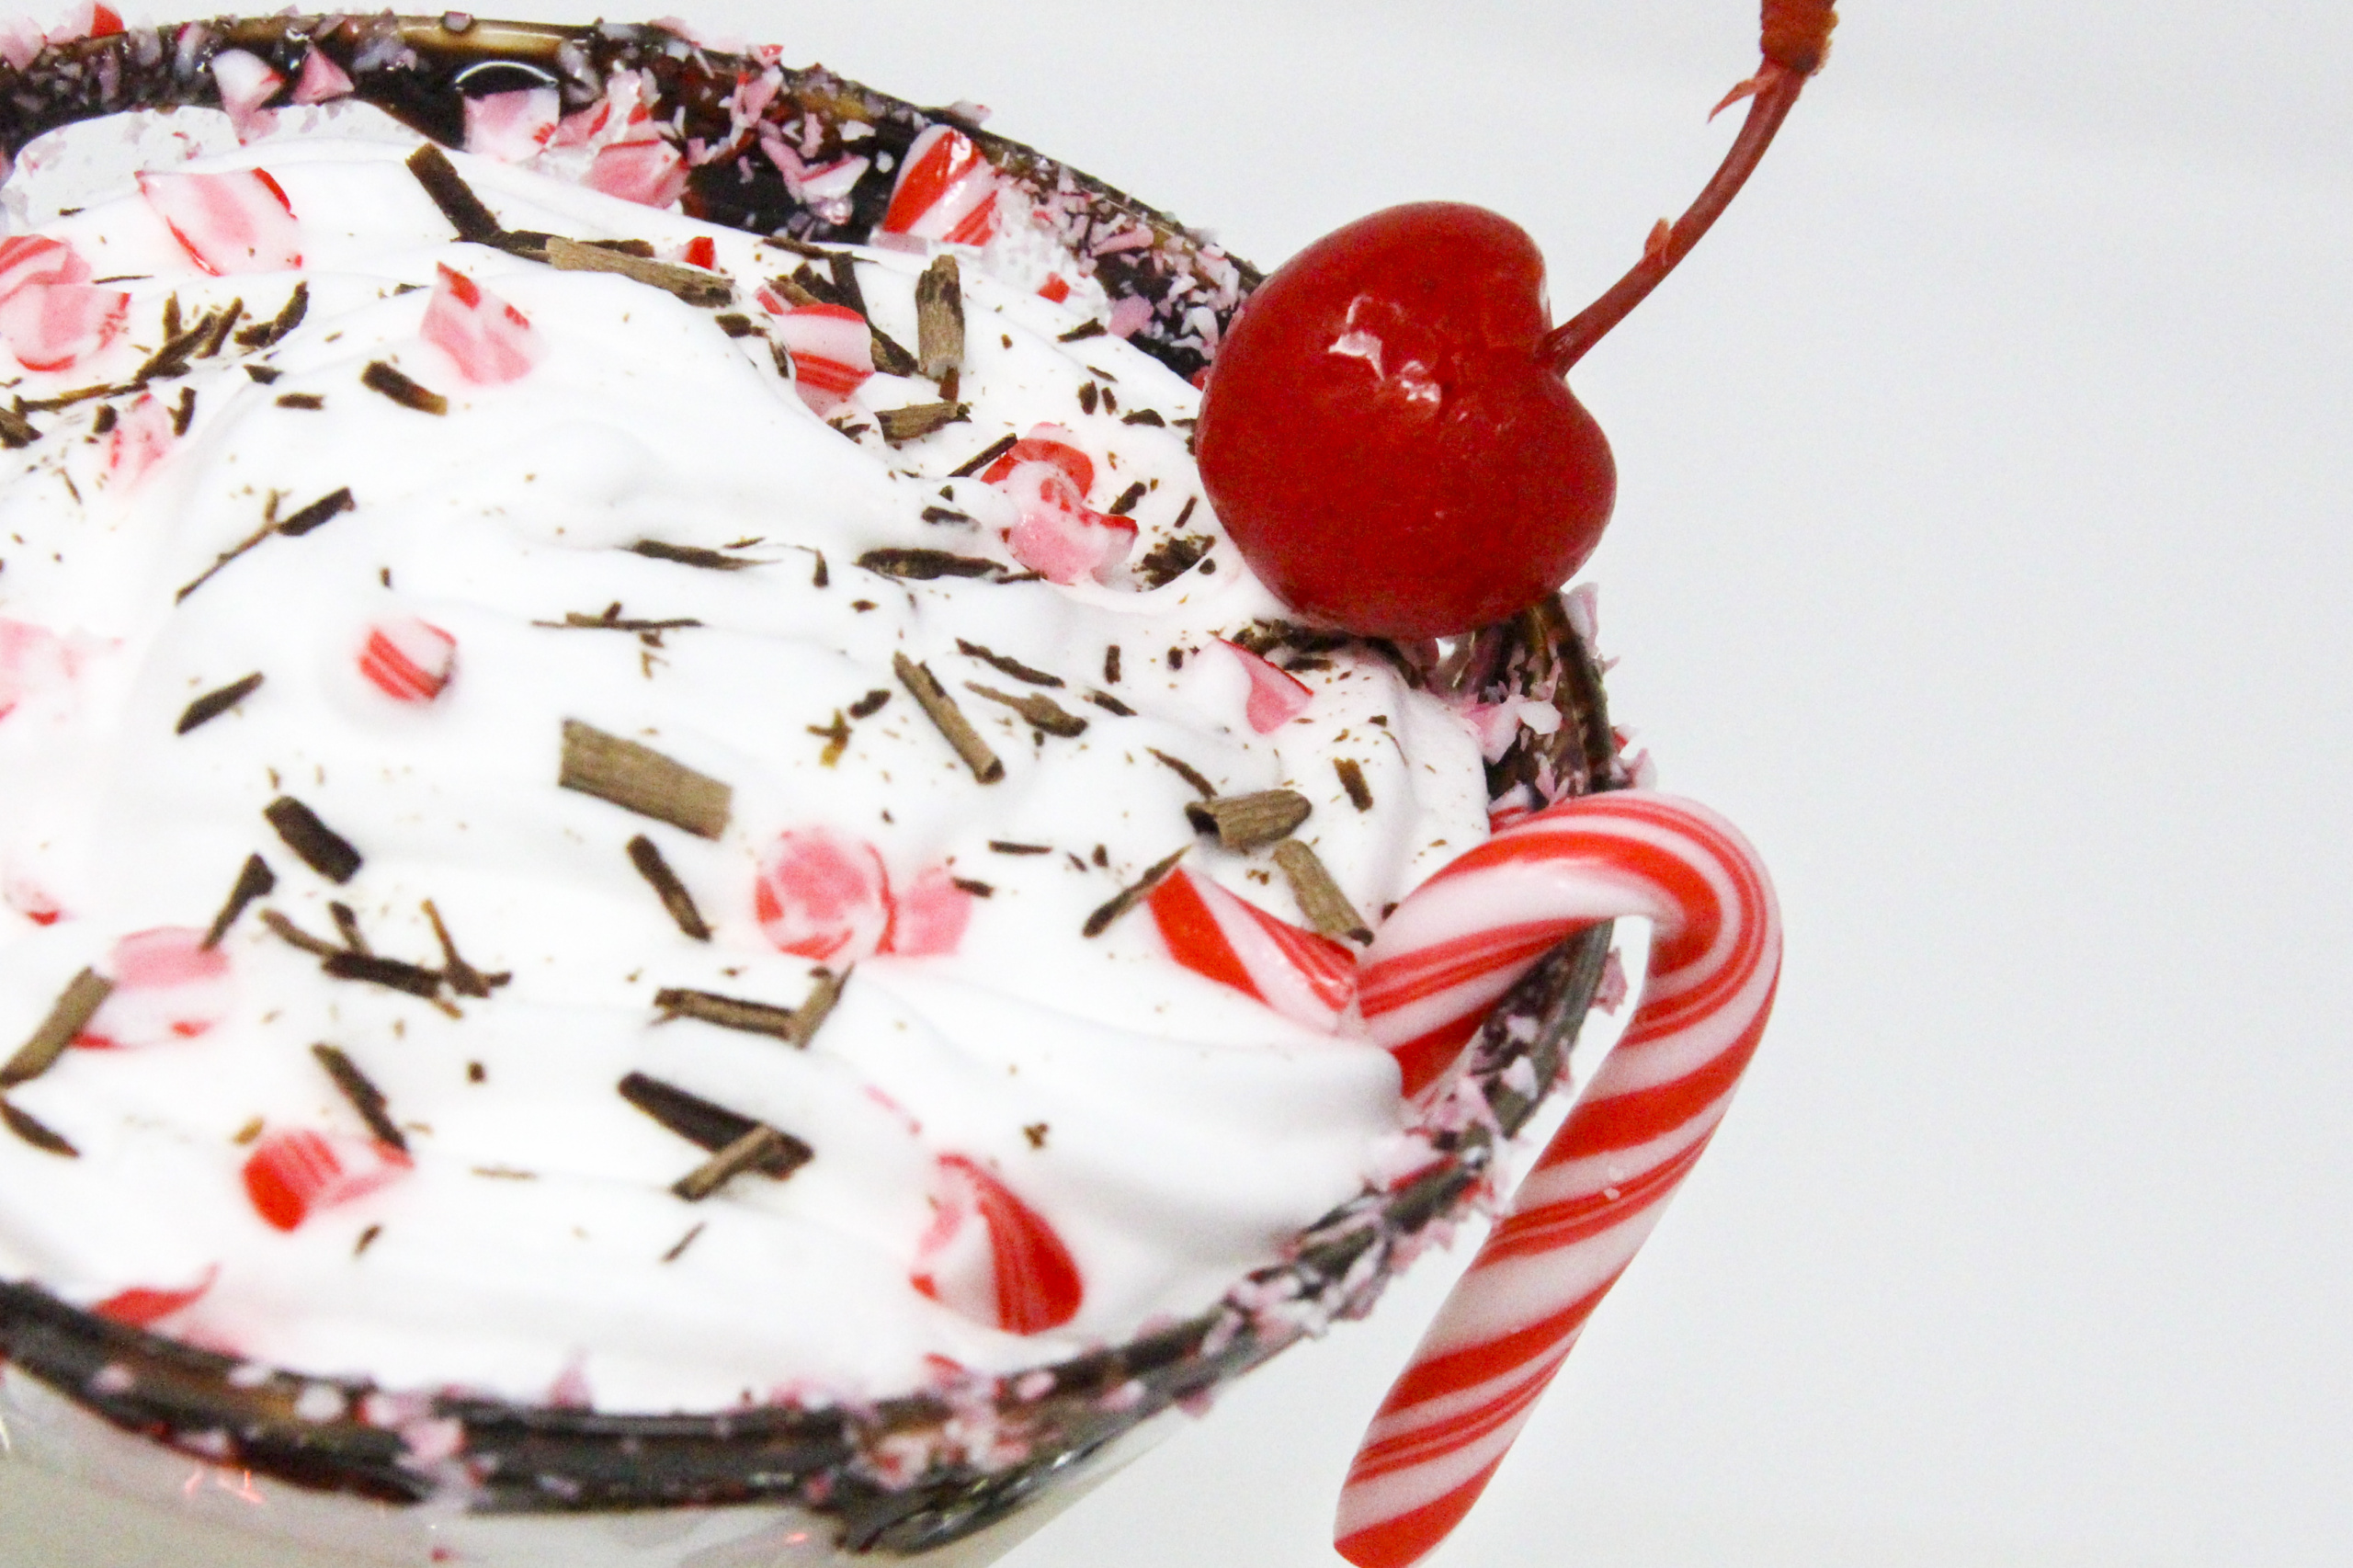 Peppy Schnappy Blast hits all the right marks for a Christmas cocktail: spirited candy cane flavors, creamy vanilla, chocolate, and whipped cream with a cherry on top! Recipe shared with permission granted by James J. Cudney, author of SLEIGH BELL TOWER.